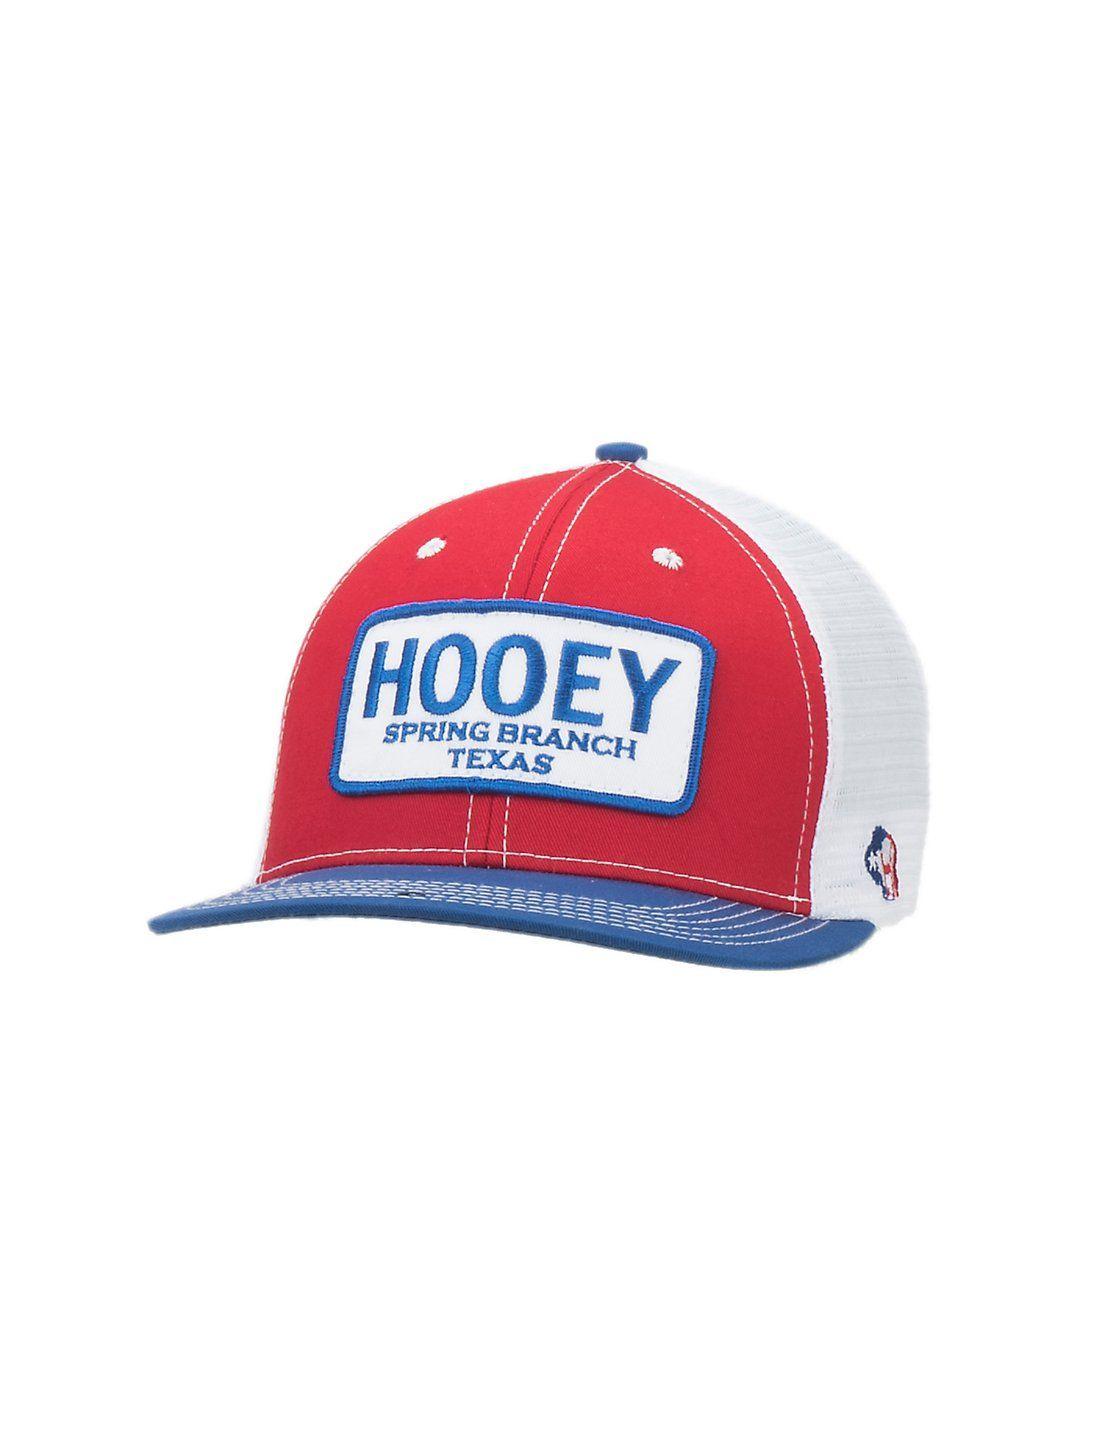 Red Cowboy Logo - HOOey Red, White and Blue with Patch Logo Mesh Back Cap | Cavender's ...